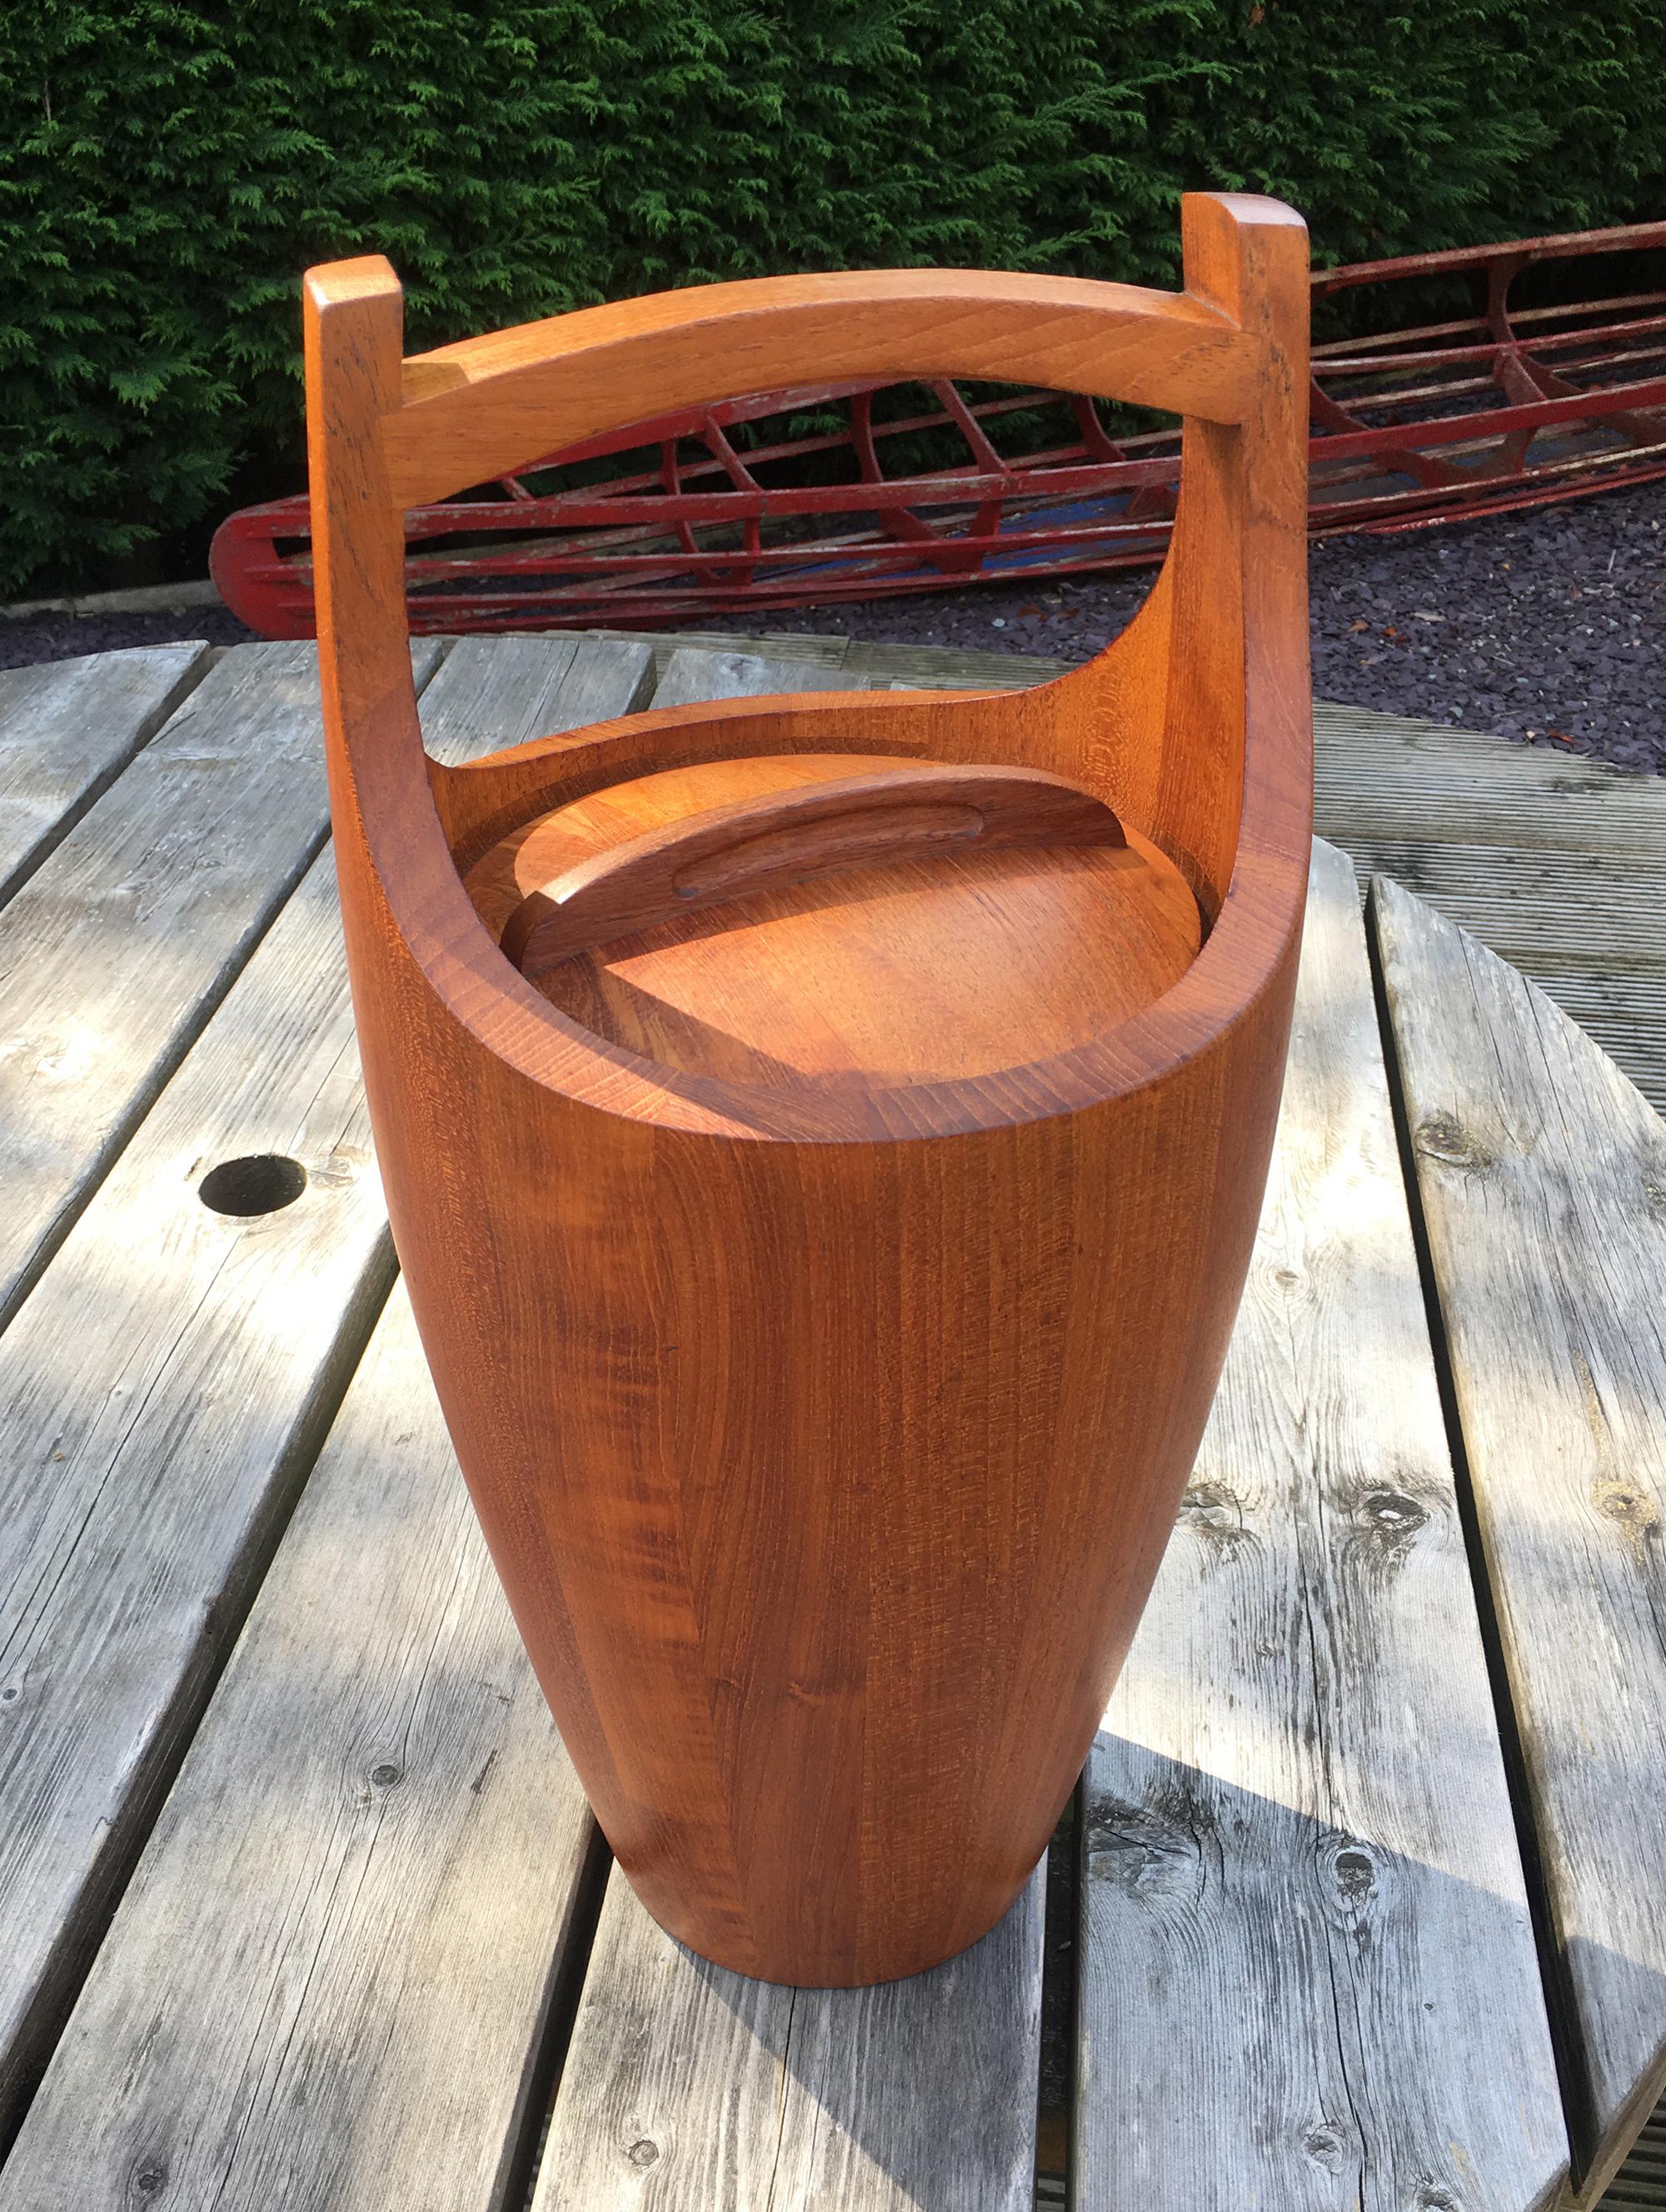 A very nice larger version of this classic ice bucket in staved solid teak by Jens Quistgaard in very nice original condition, with it's original black liner.